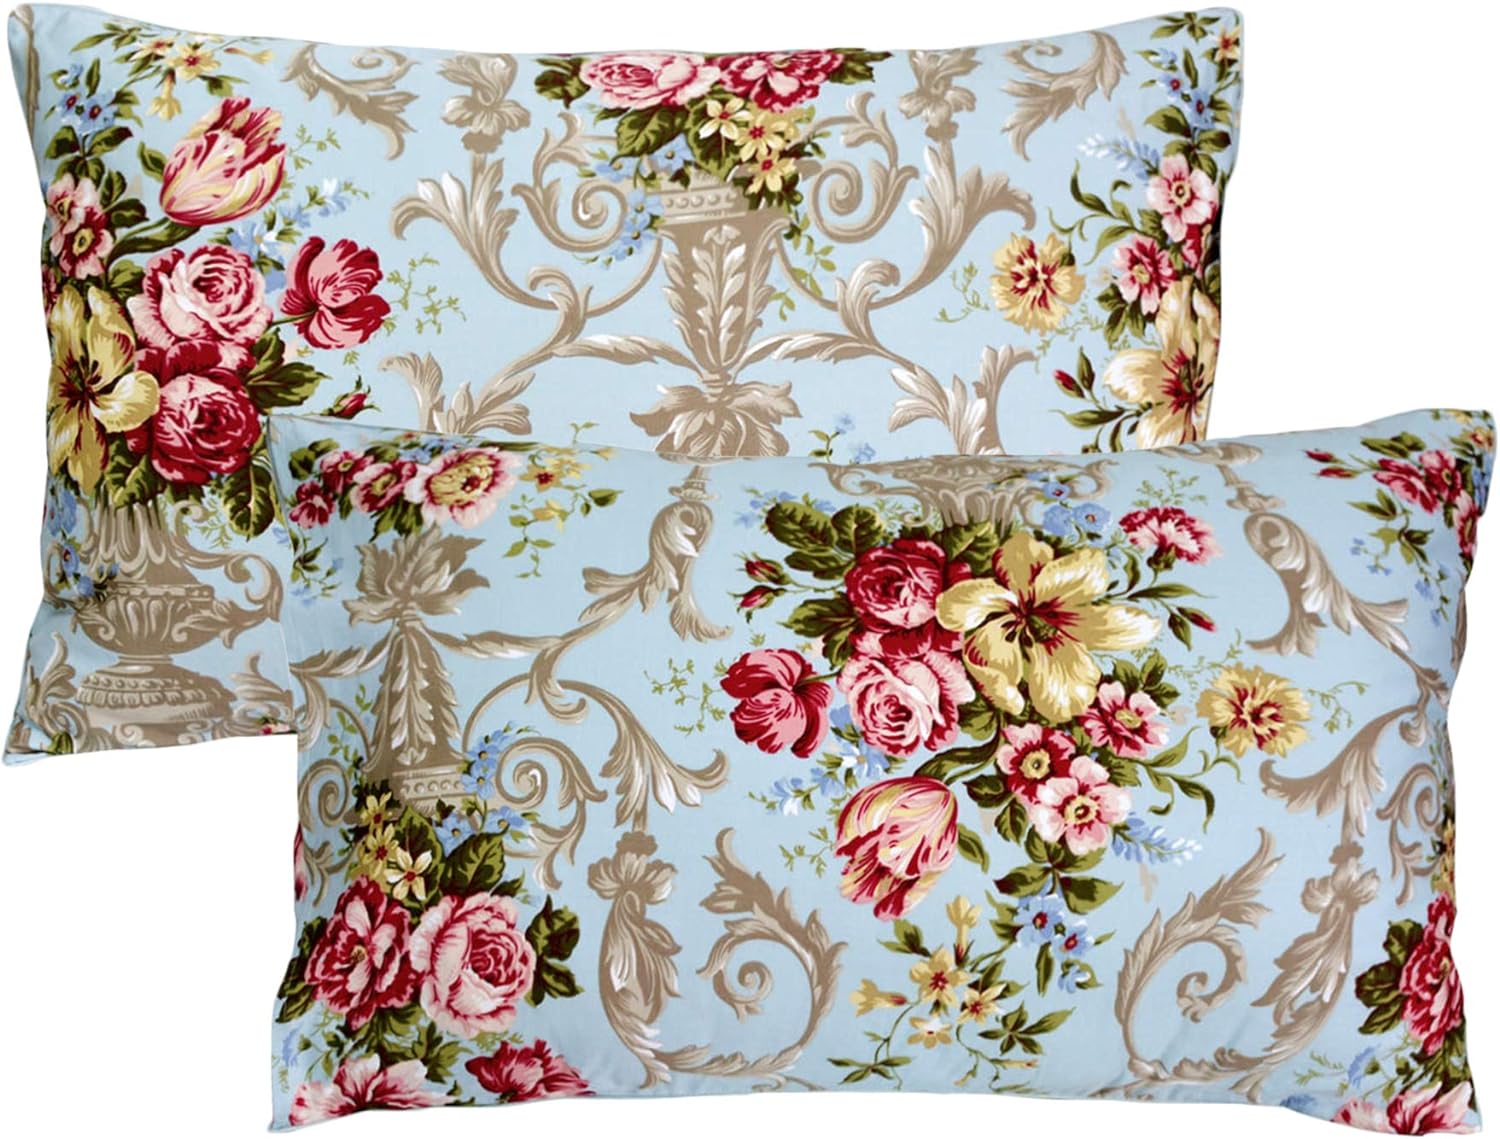 FADFAY 20X30 Pillowcase Luxury Peony Floral Shams 100% Egyptian Cotton Pillow Covers, 2Pcs, Standard Size (Twin/Full/Queen)